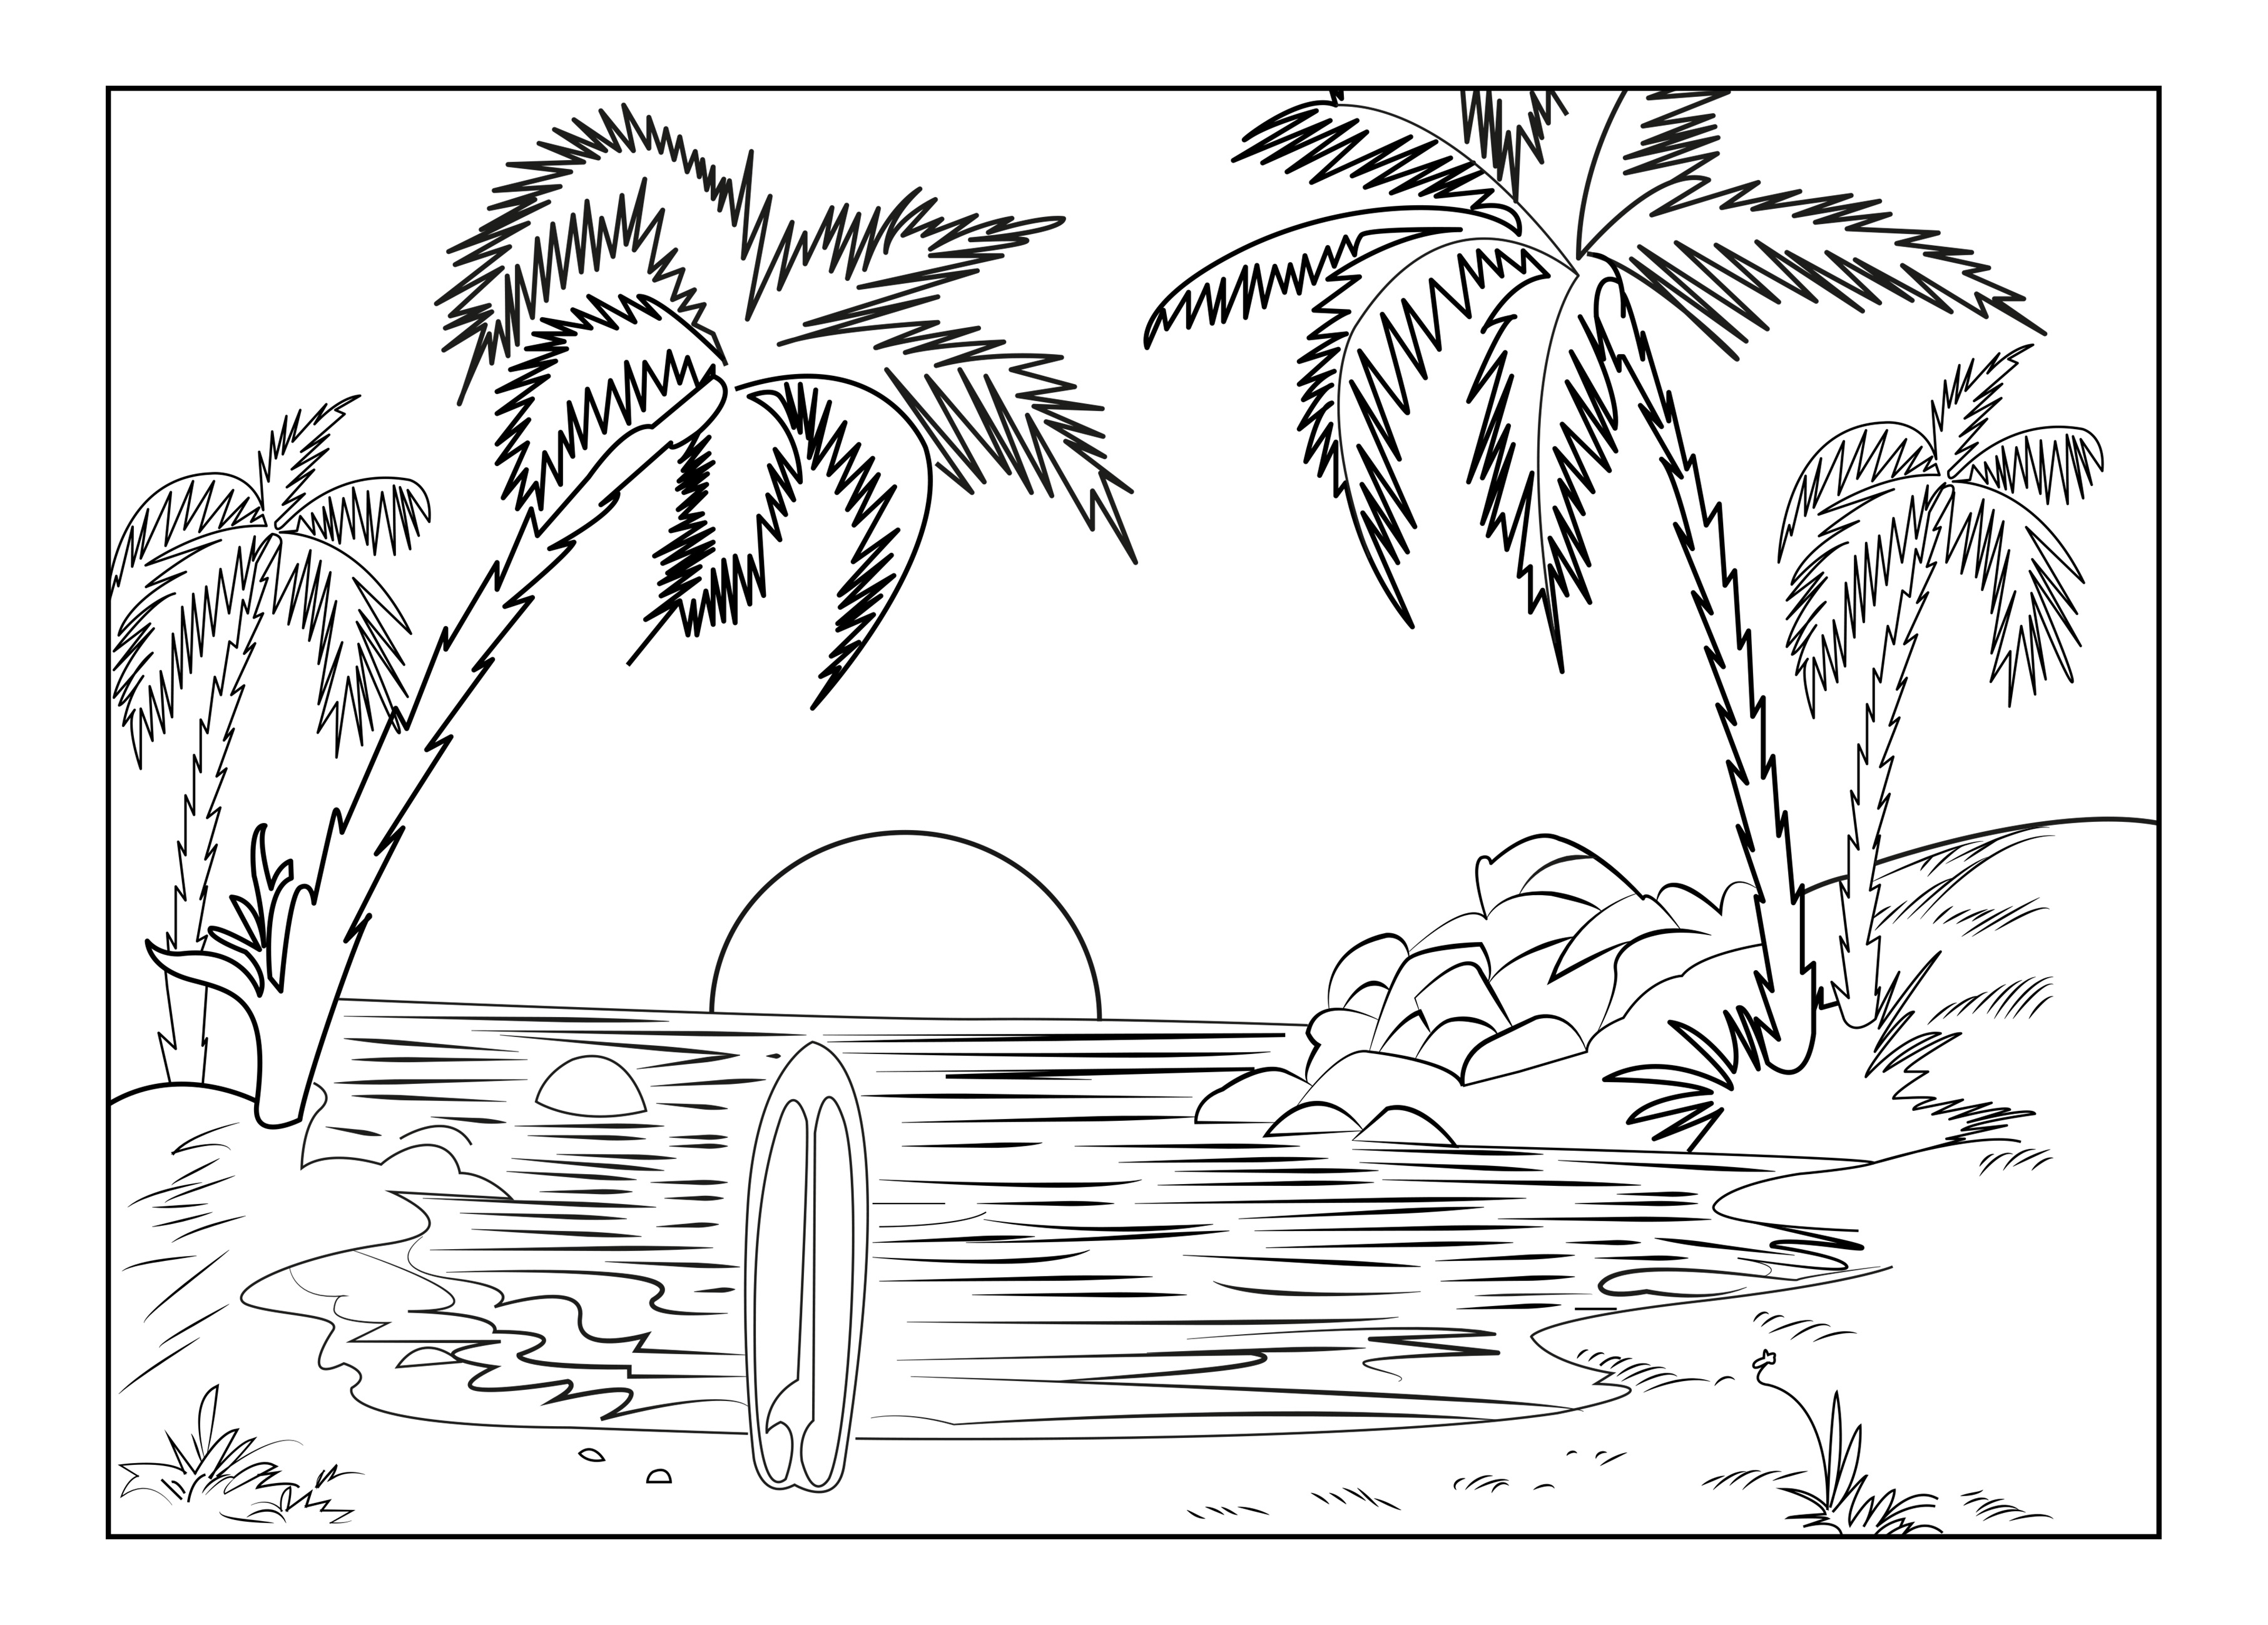 Landscapes - Coloring pages for adults : coloring-page-adults-landscape